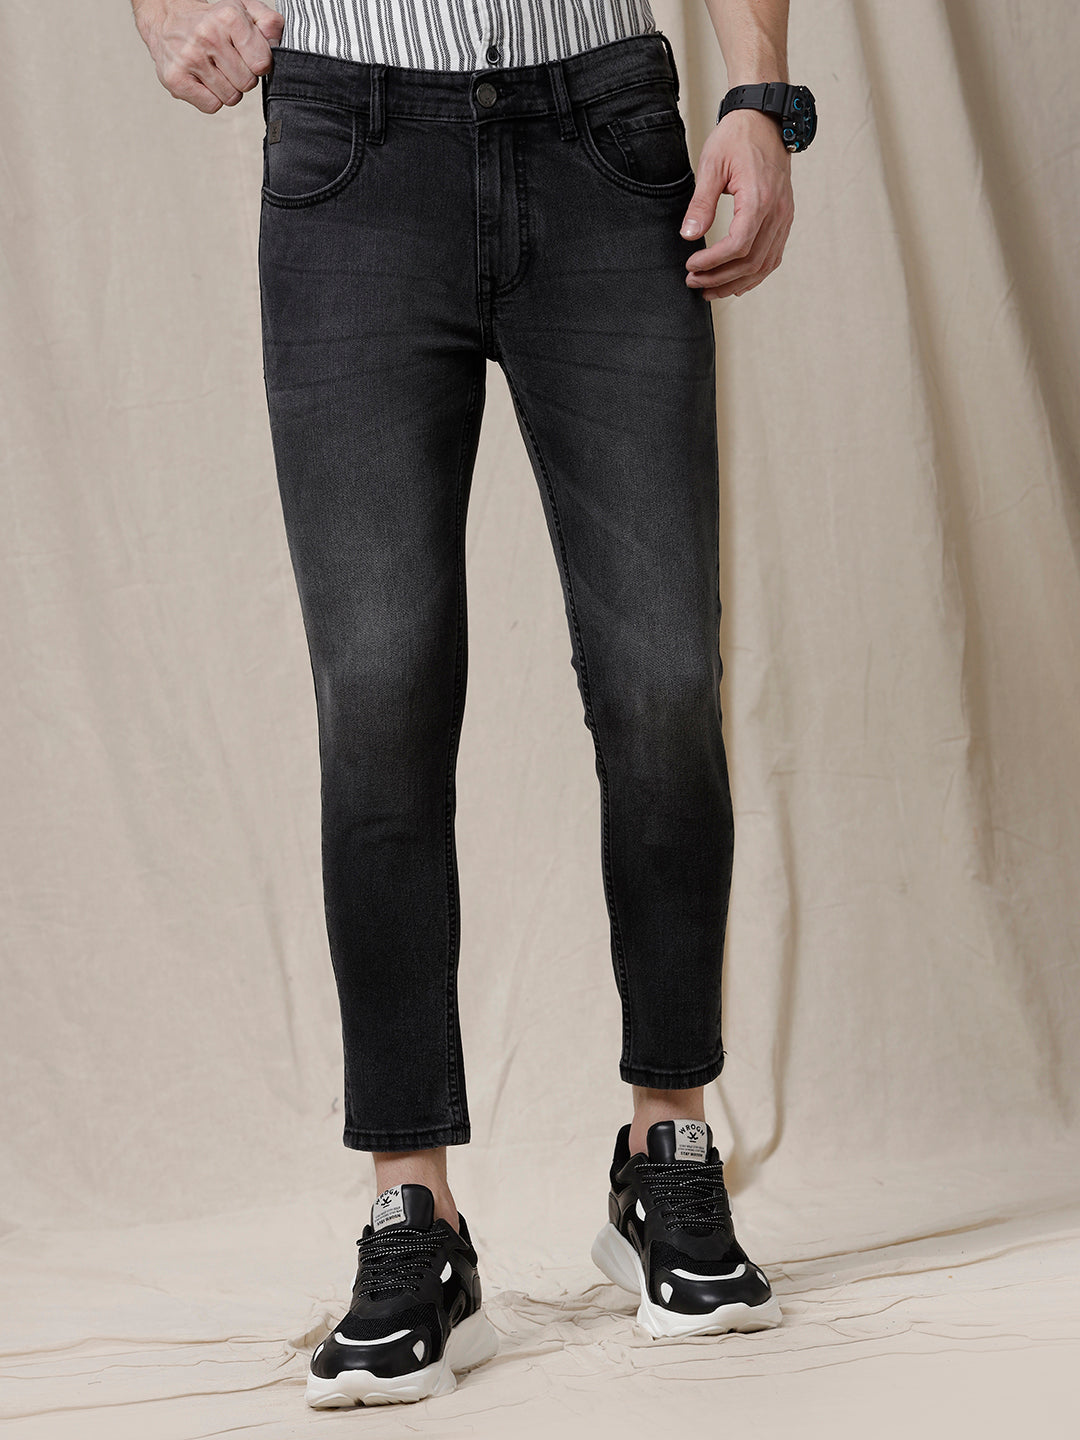 Grey Fade Cropped Jeans